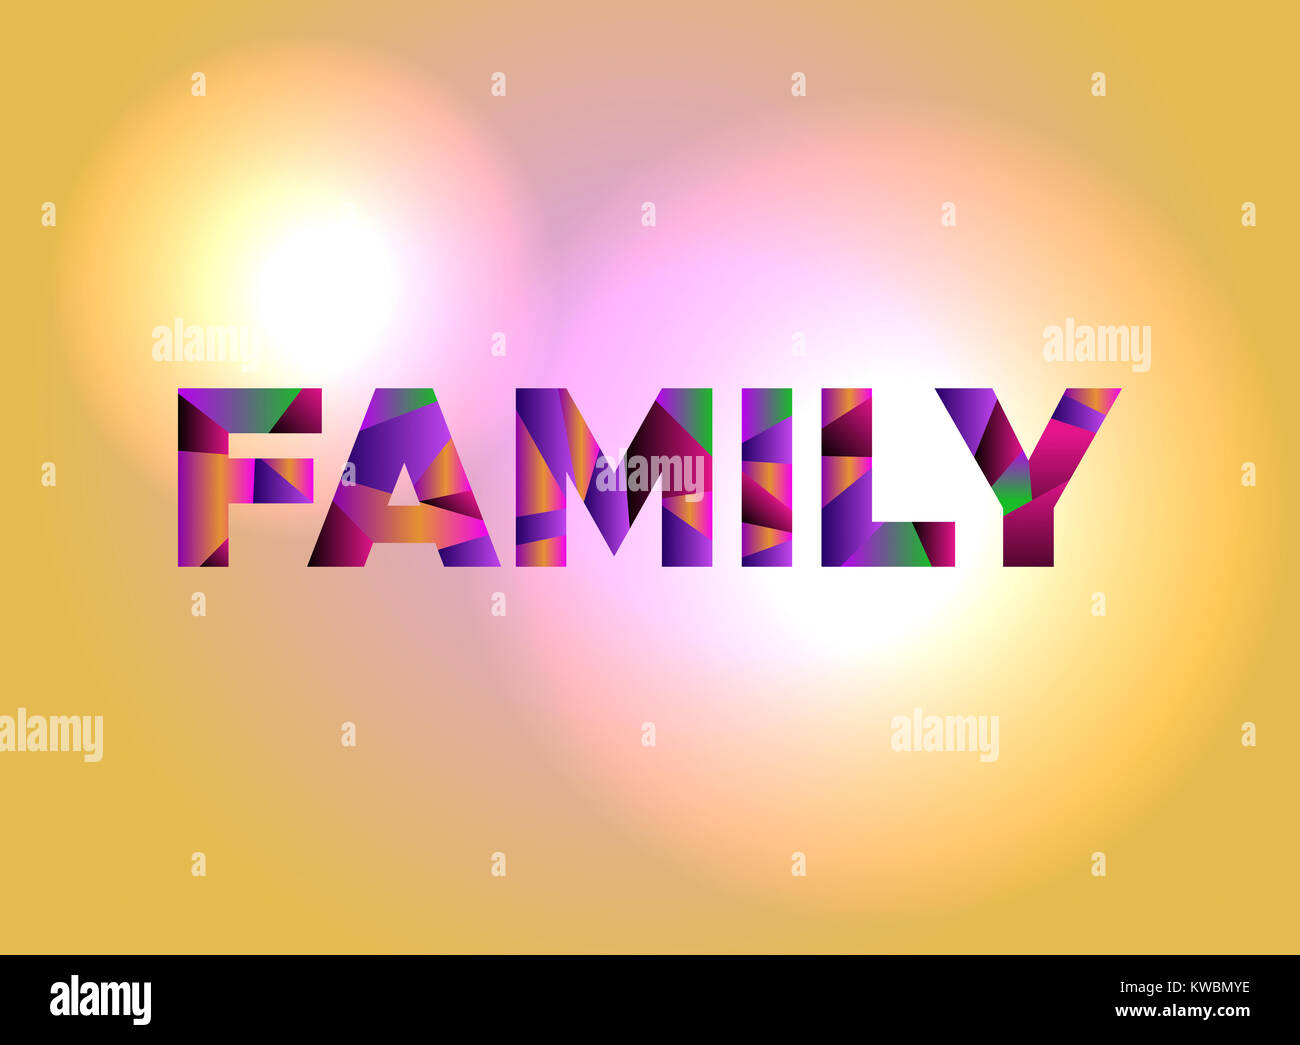 the-word-family-written-in-colorful-abstract-word-art-on-a-vibrant-KWBMYE.jpg